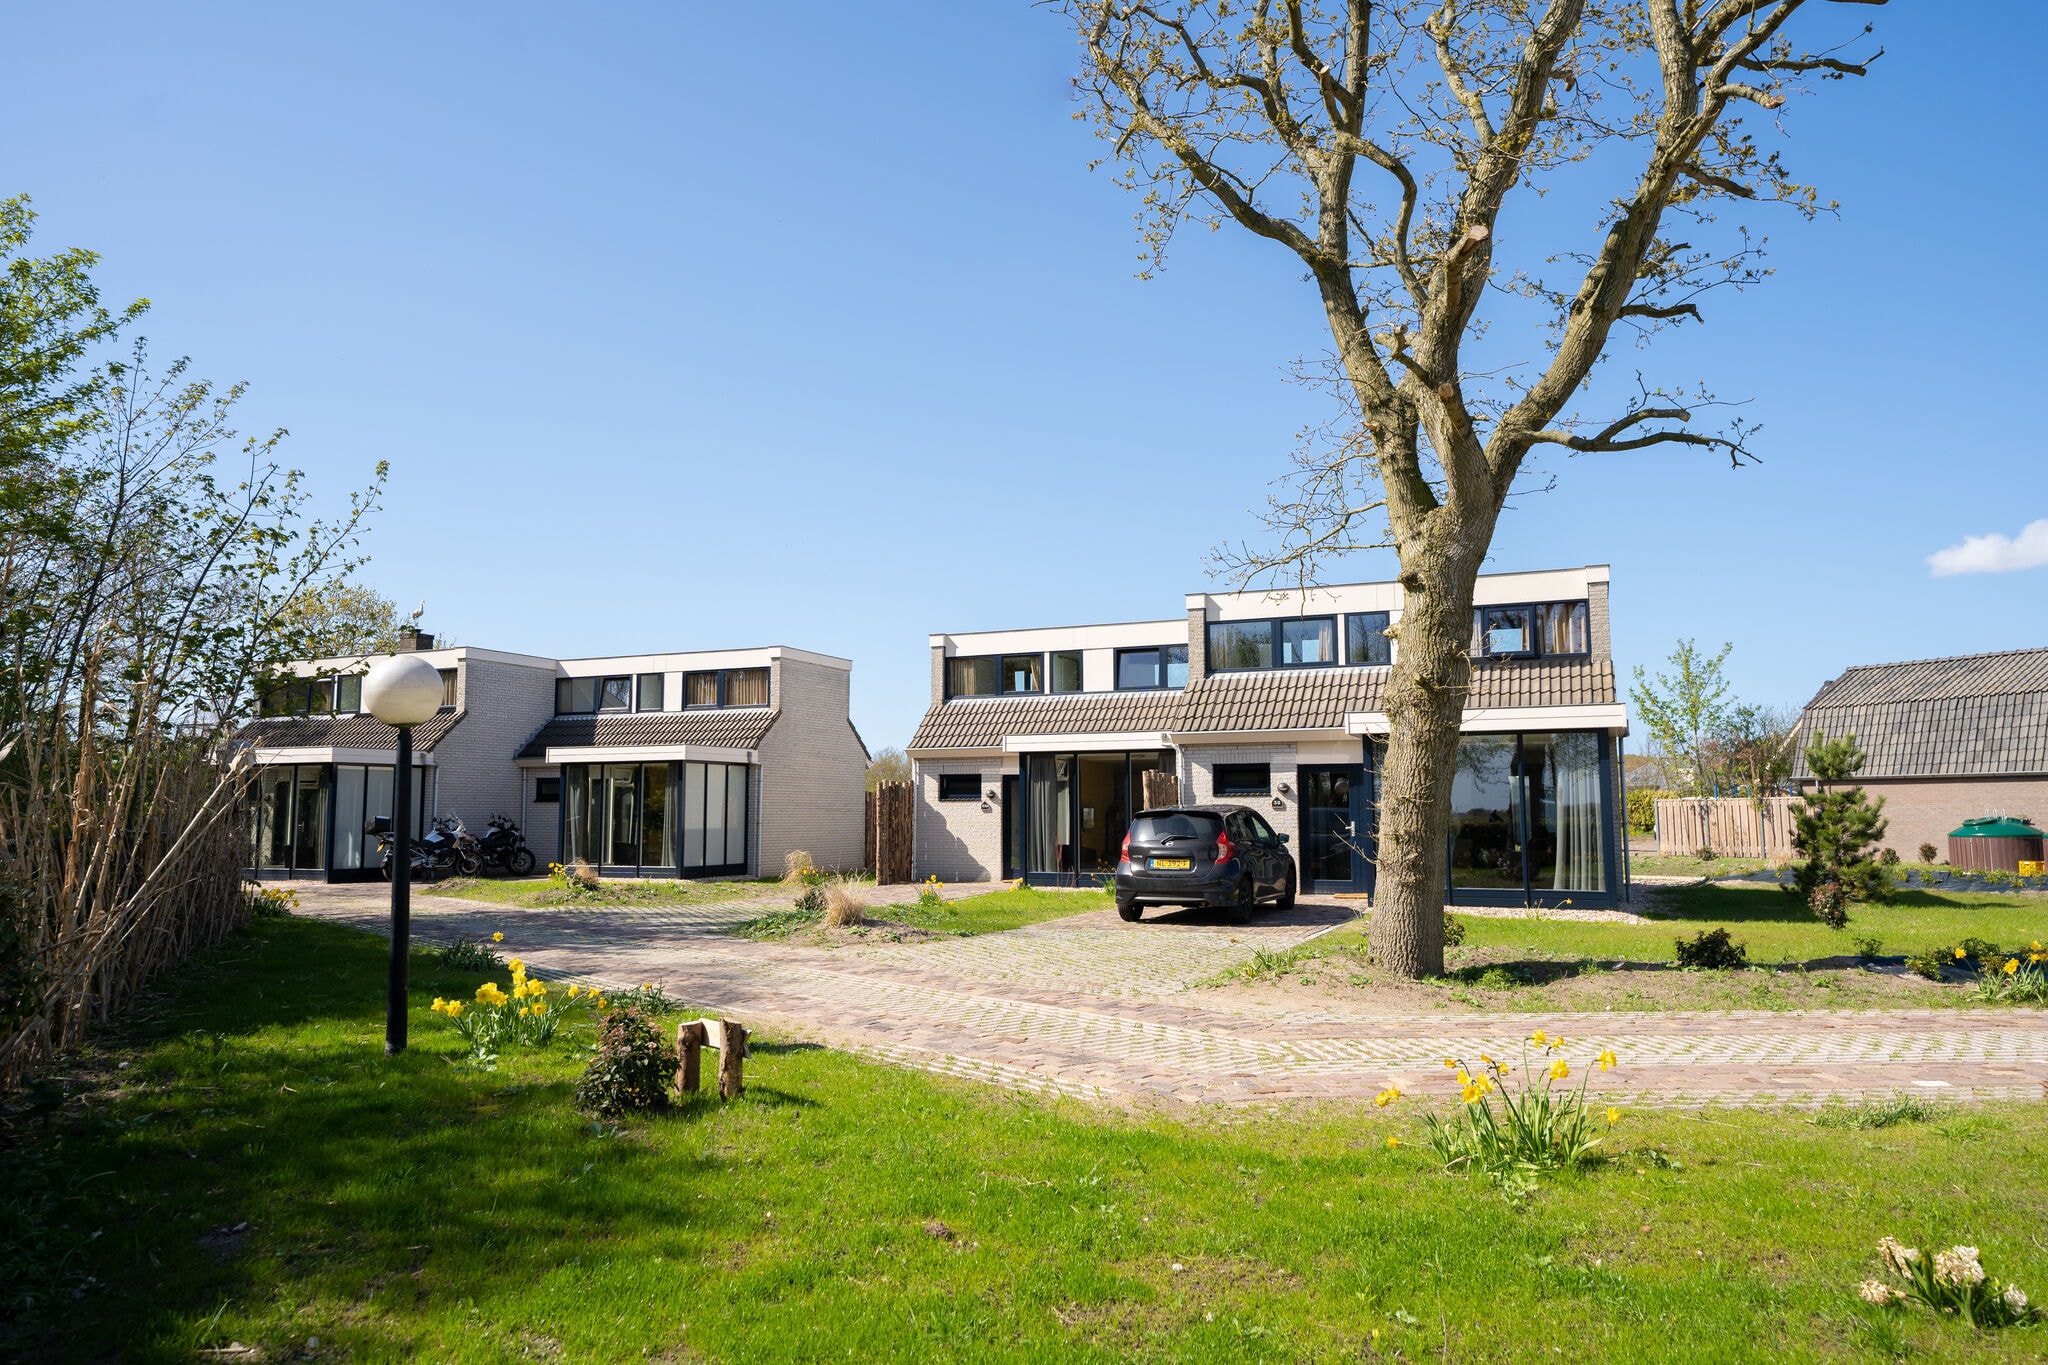 Cozy accommodation with WiFi, located on Texel